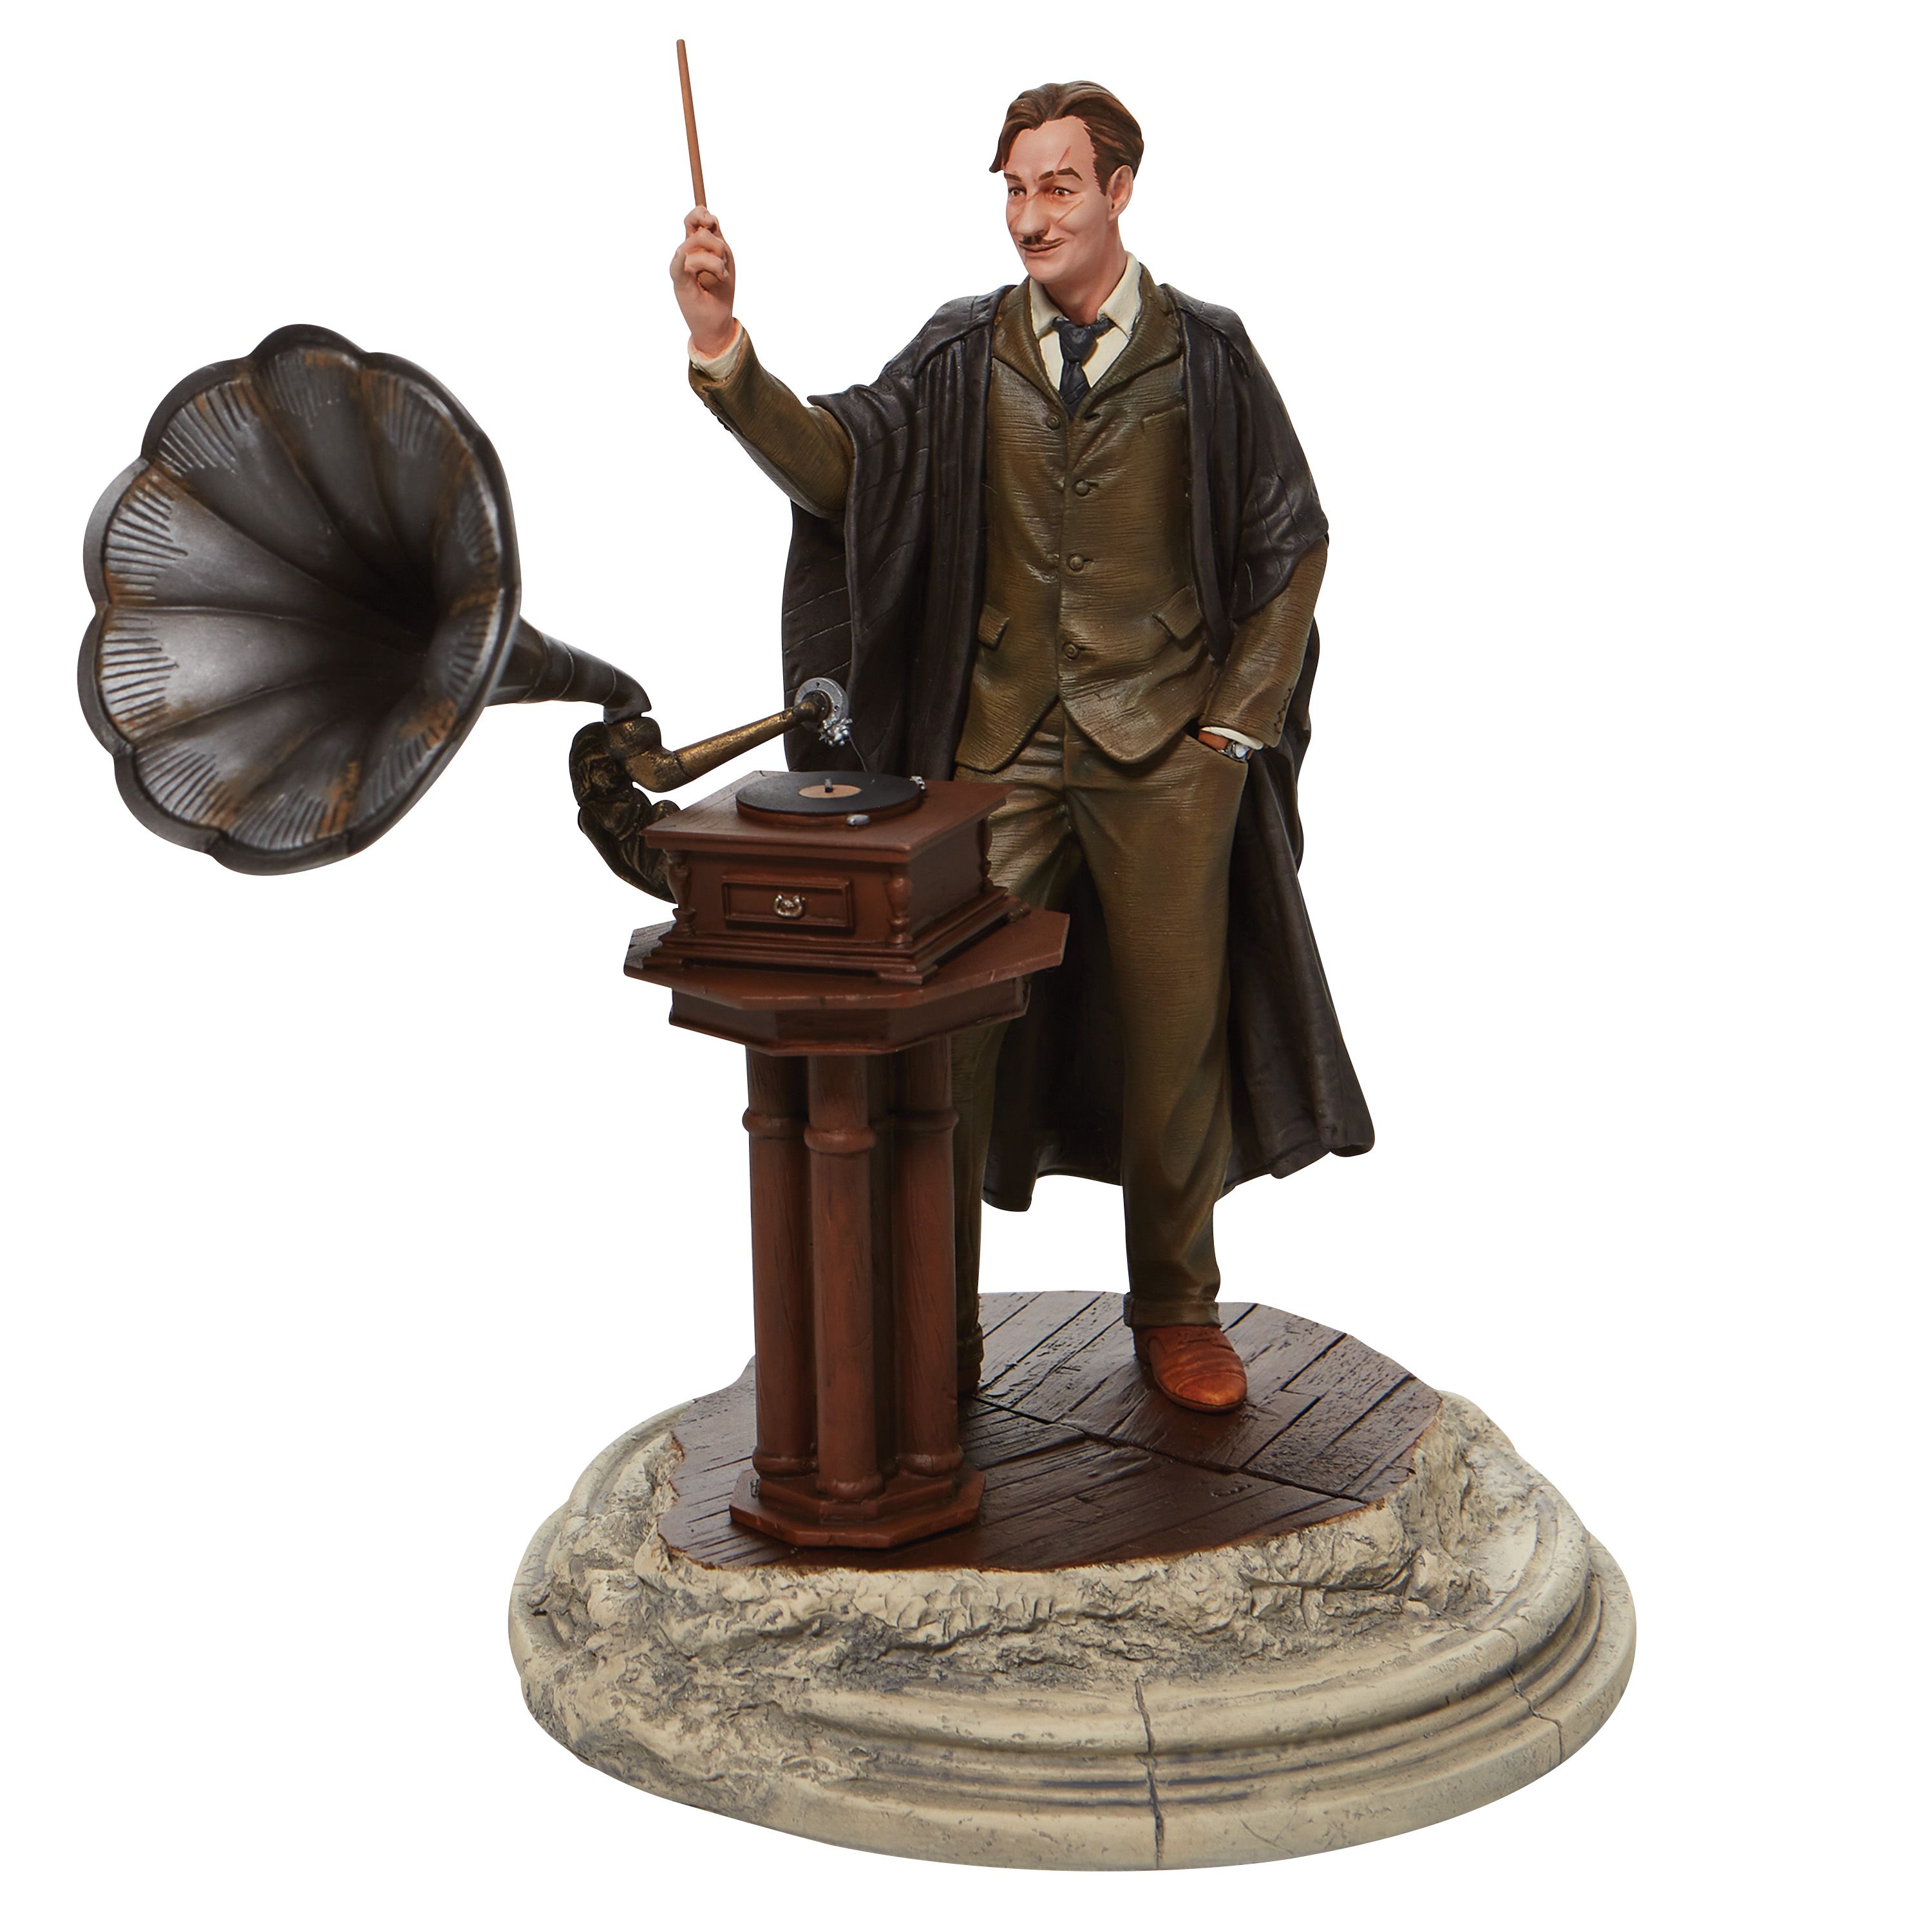 Enesco launches new characters from The Prisoner of Azkaban into its Harry Potter Inspired collection